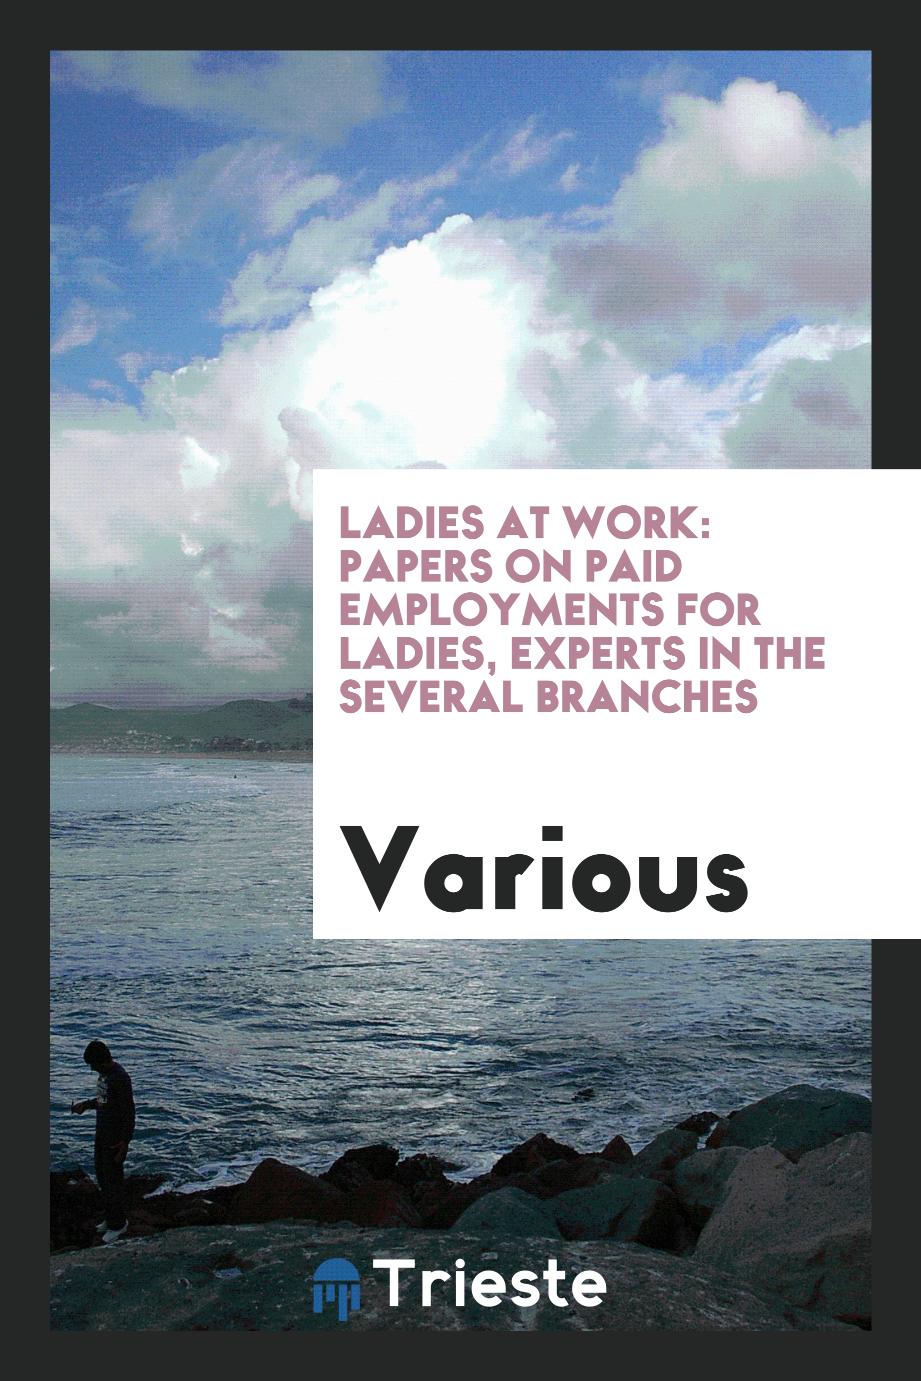 Ladies at Work: Papers on Paid Employments for Ladies, Experts in the Several Branches